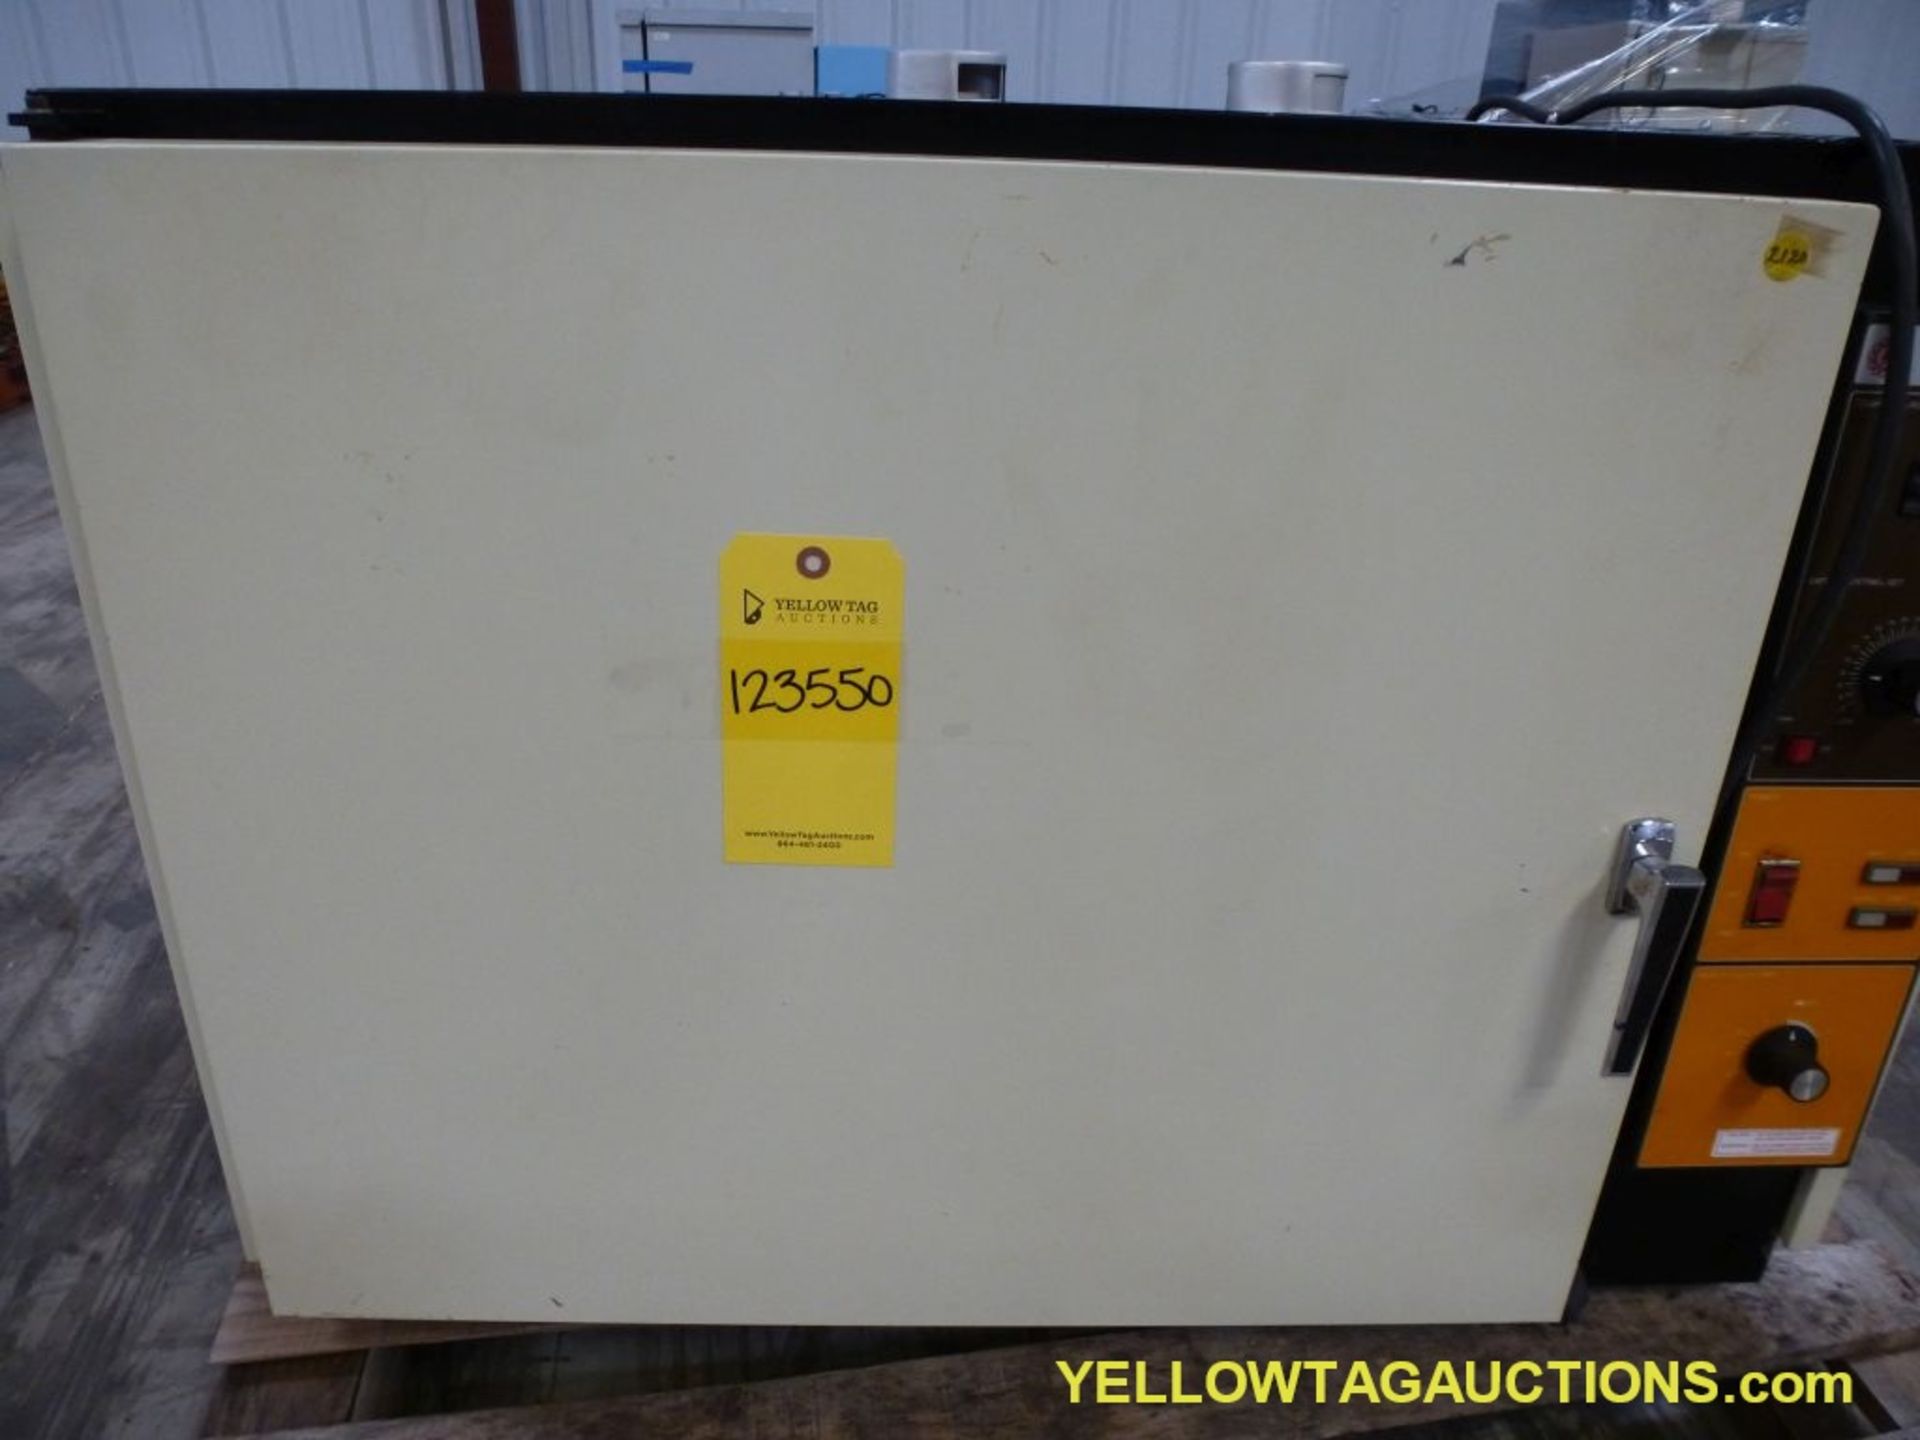 Fischer 400 Series Isotemp Oven|Model No. 438F104 - 572 Deg. F18" x 20" x 18"D230VLocation: YTA - Image 3 of 7